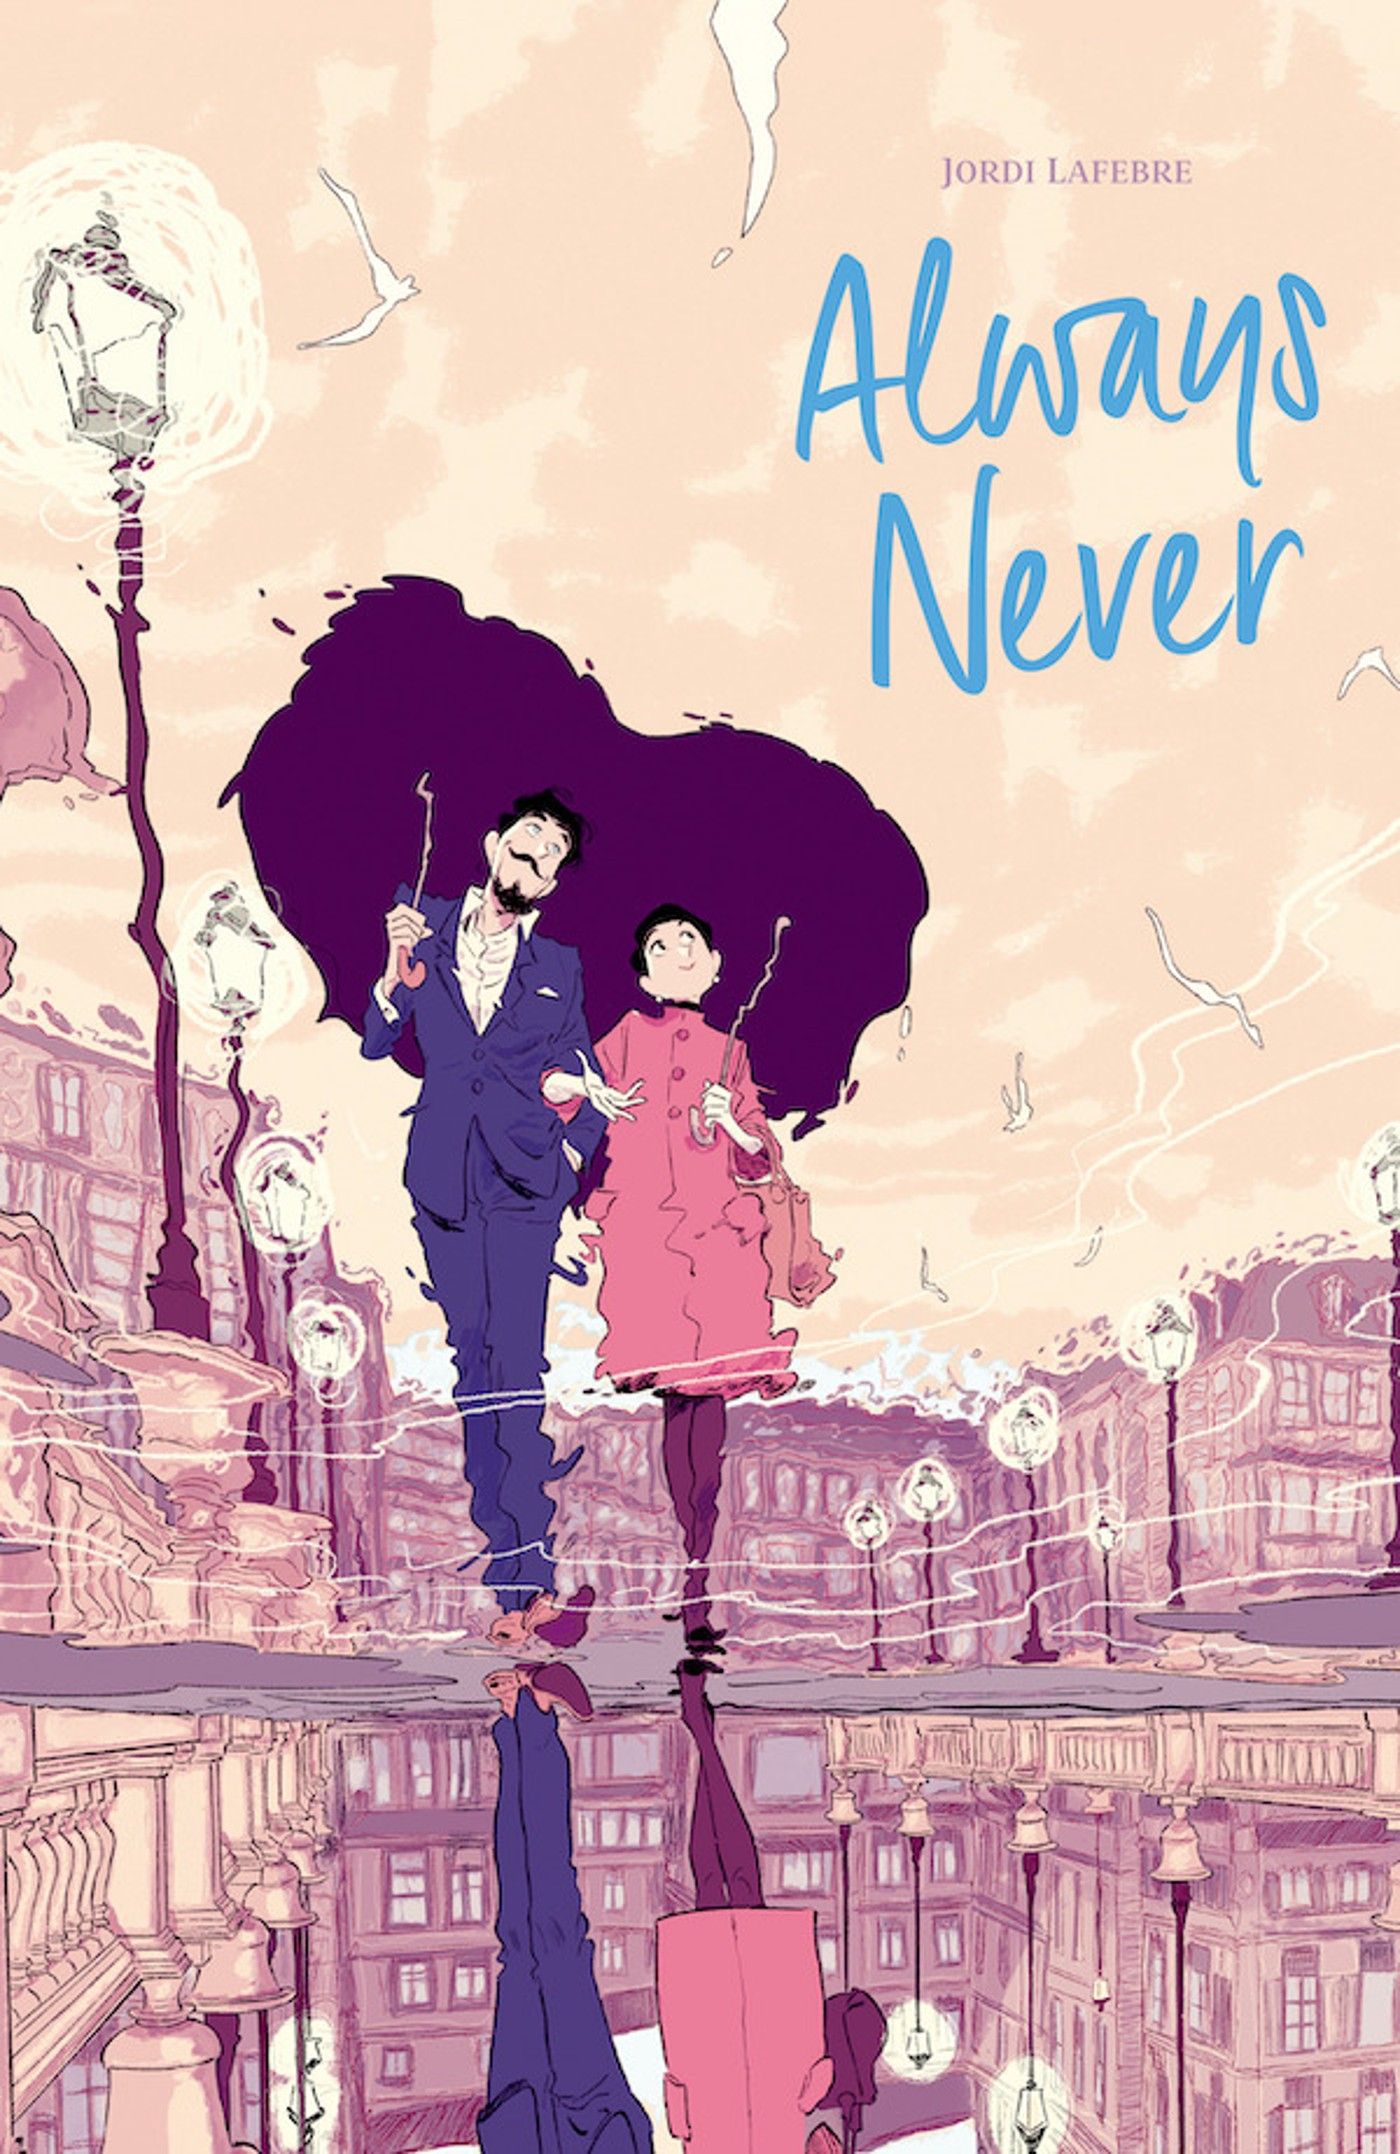 Classic Romance Gets a Memento Twist in French Comic ‘Always Never’